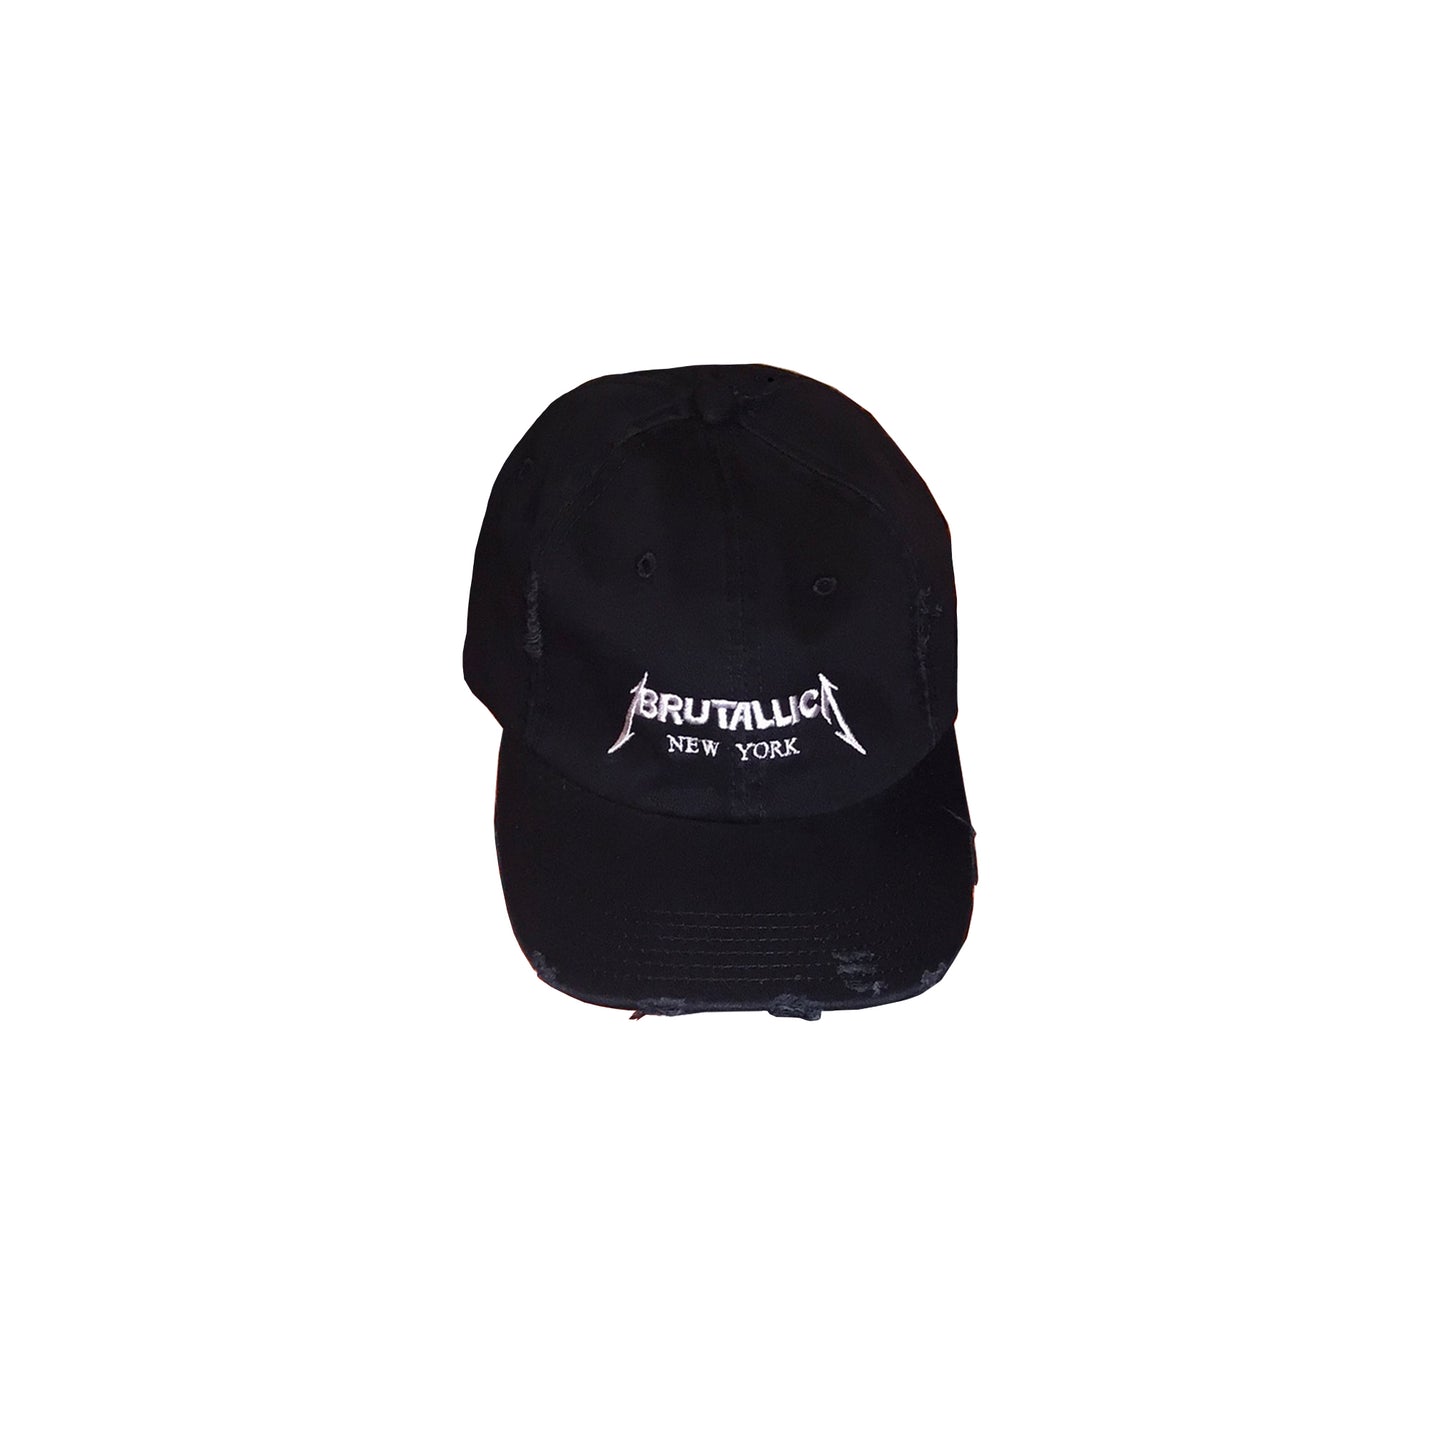 Brutallica distressed dad hat in black  colorway with white embroidered logo